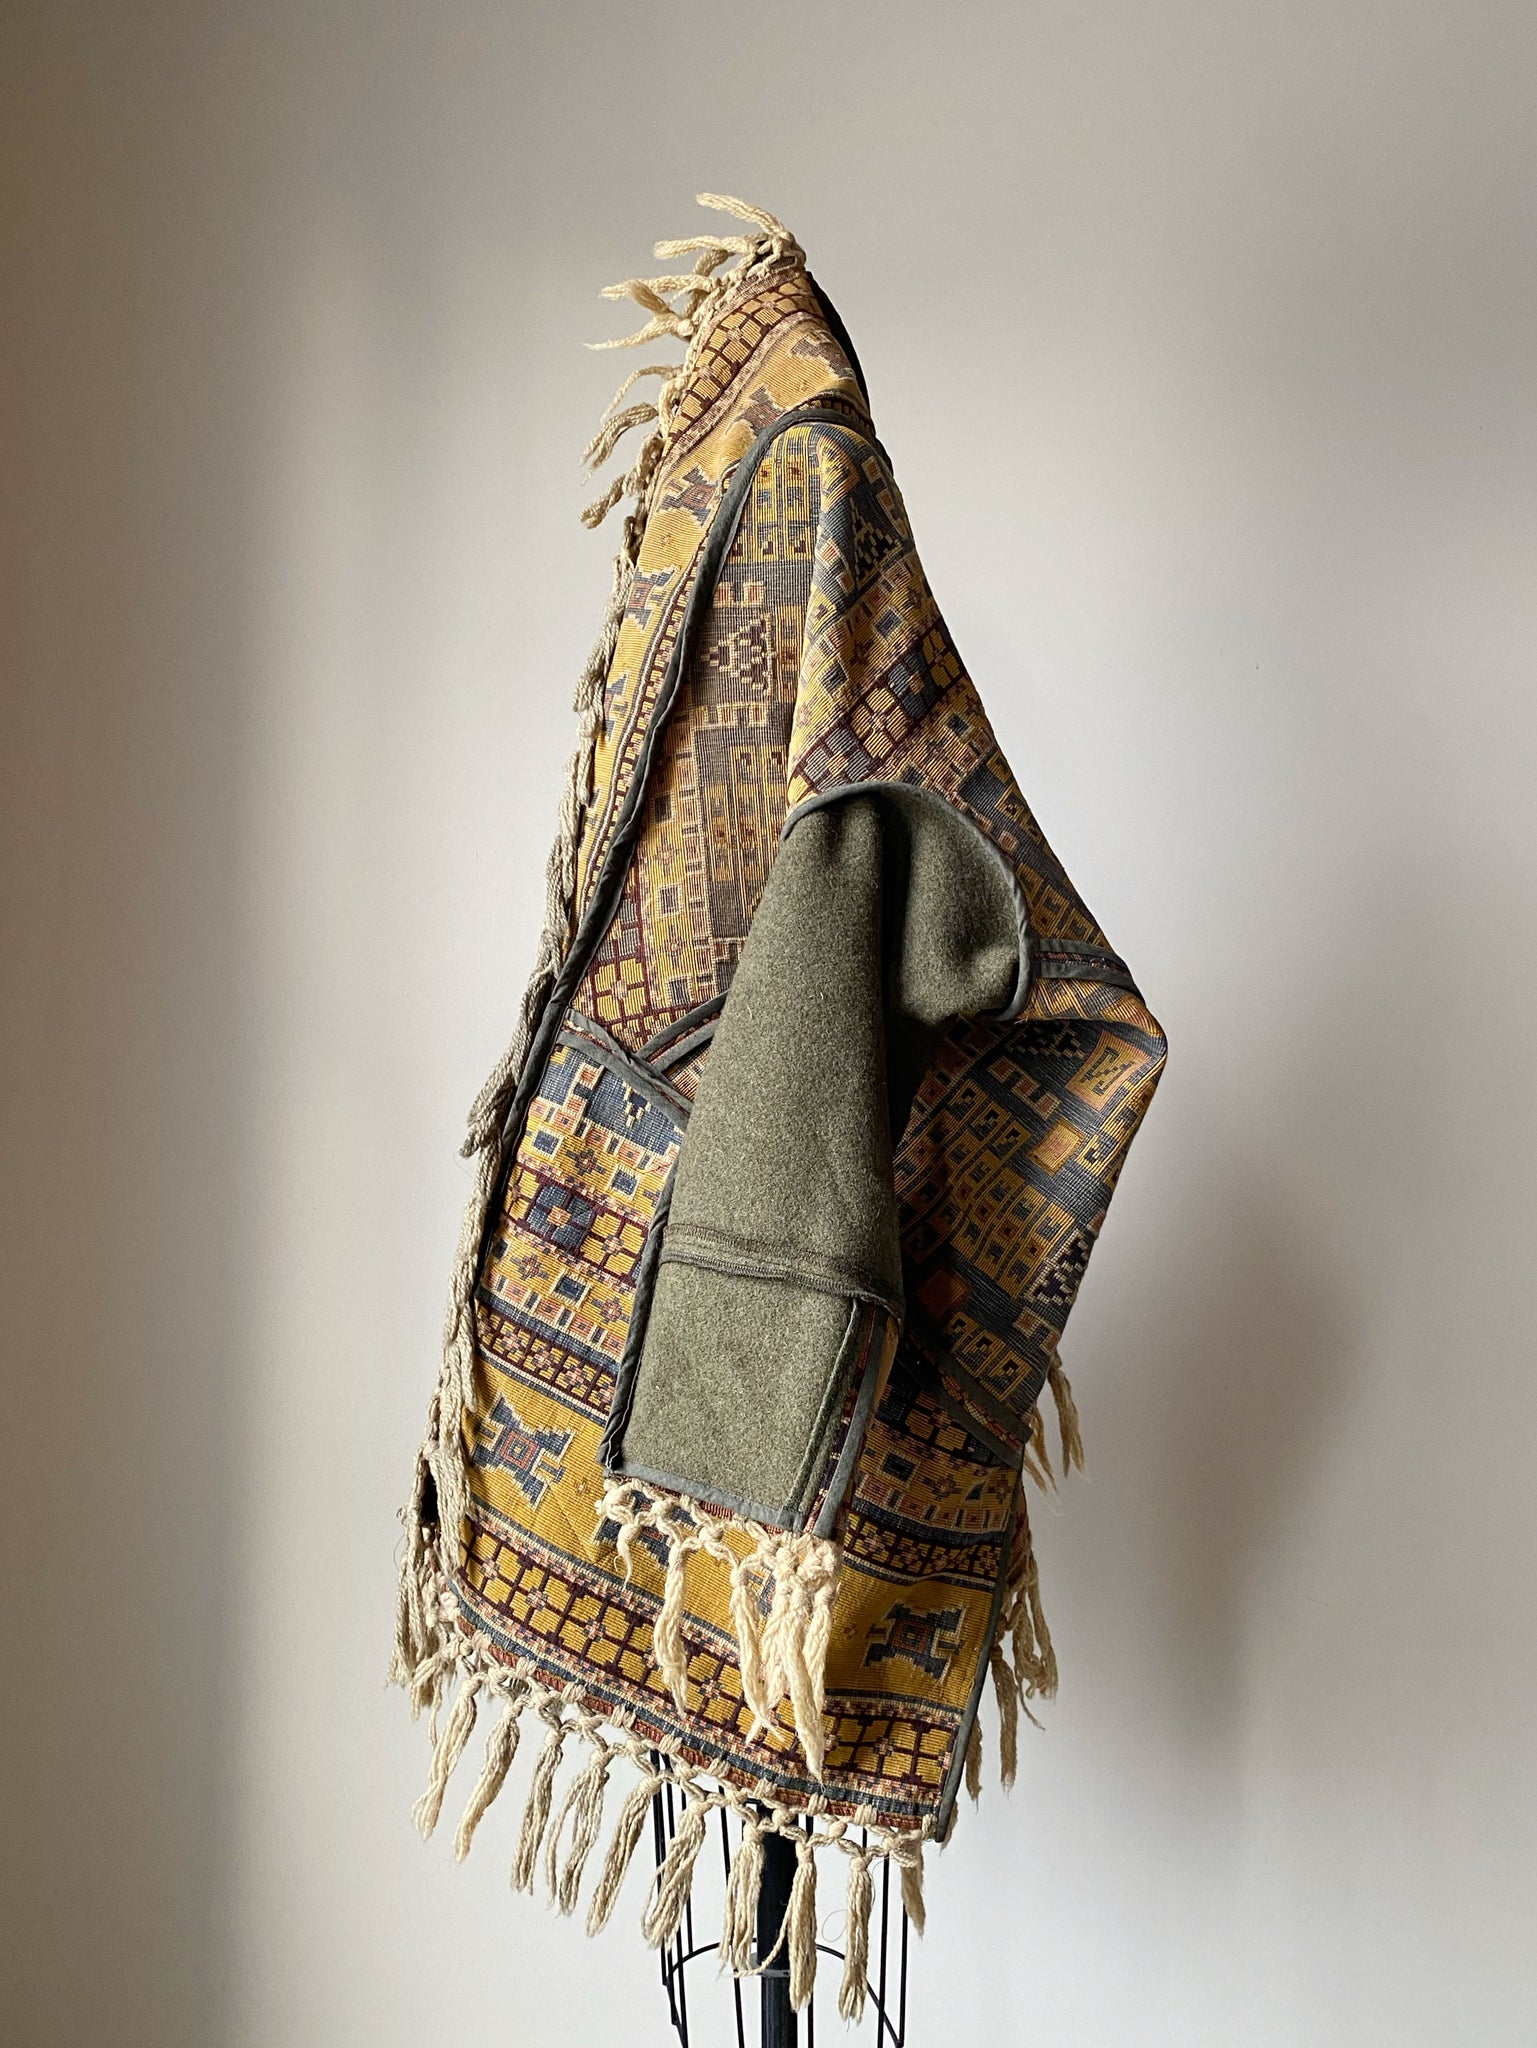 victorian jacquard and army blanket cocoon 5